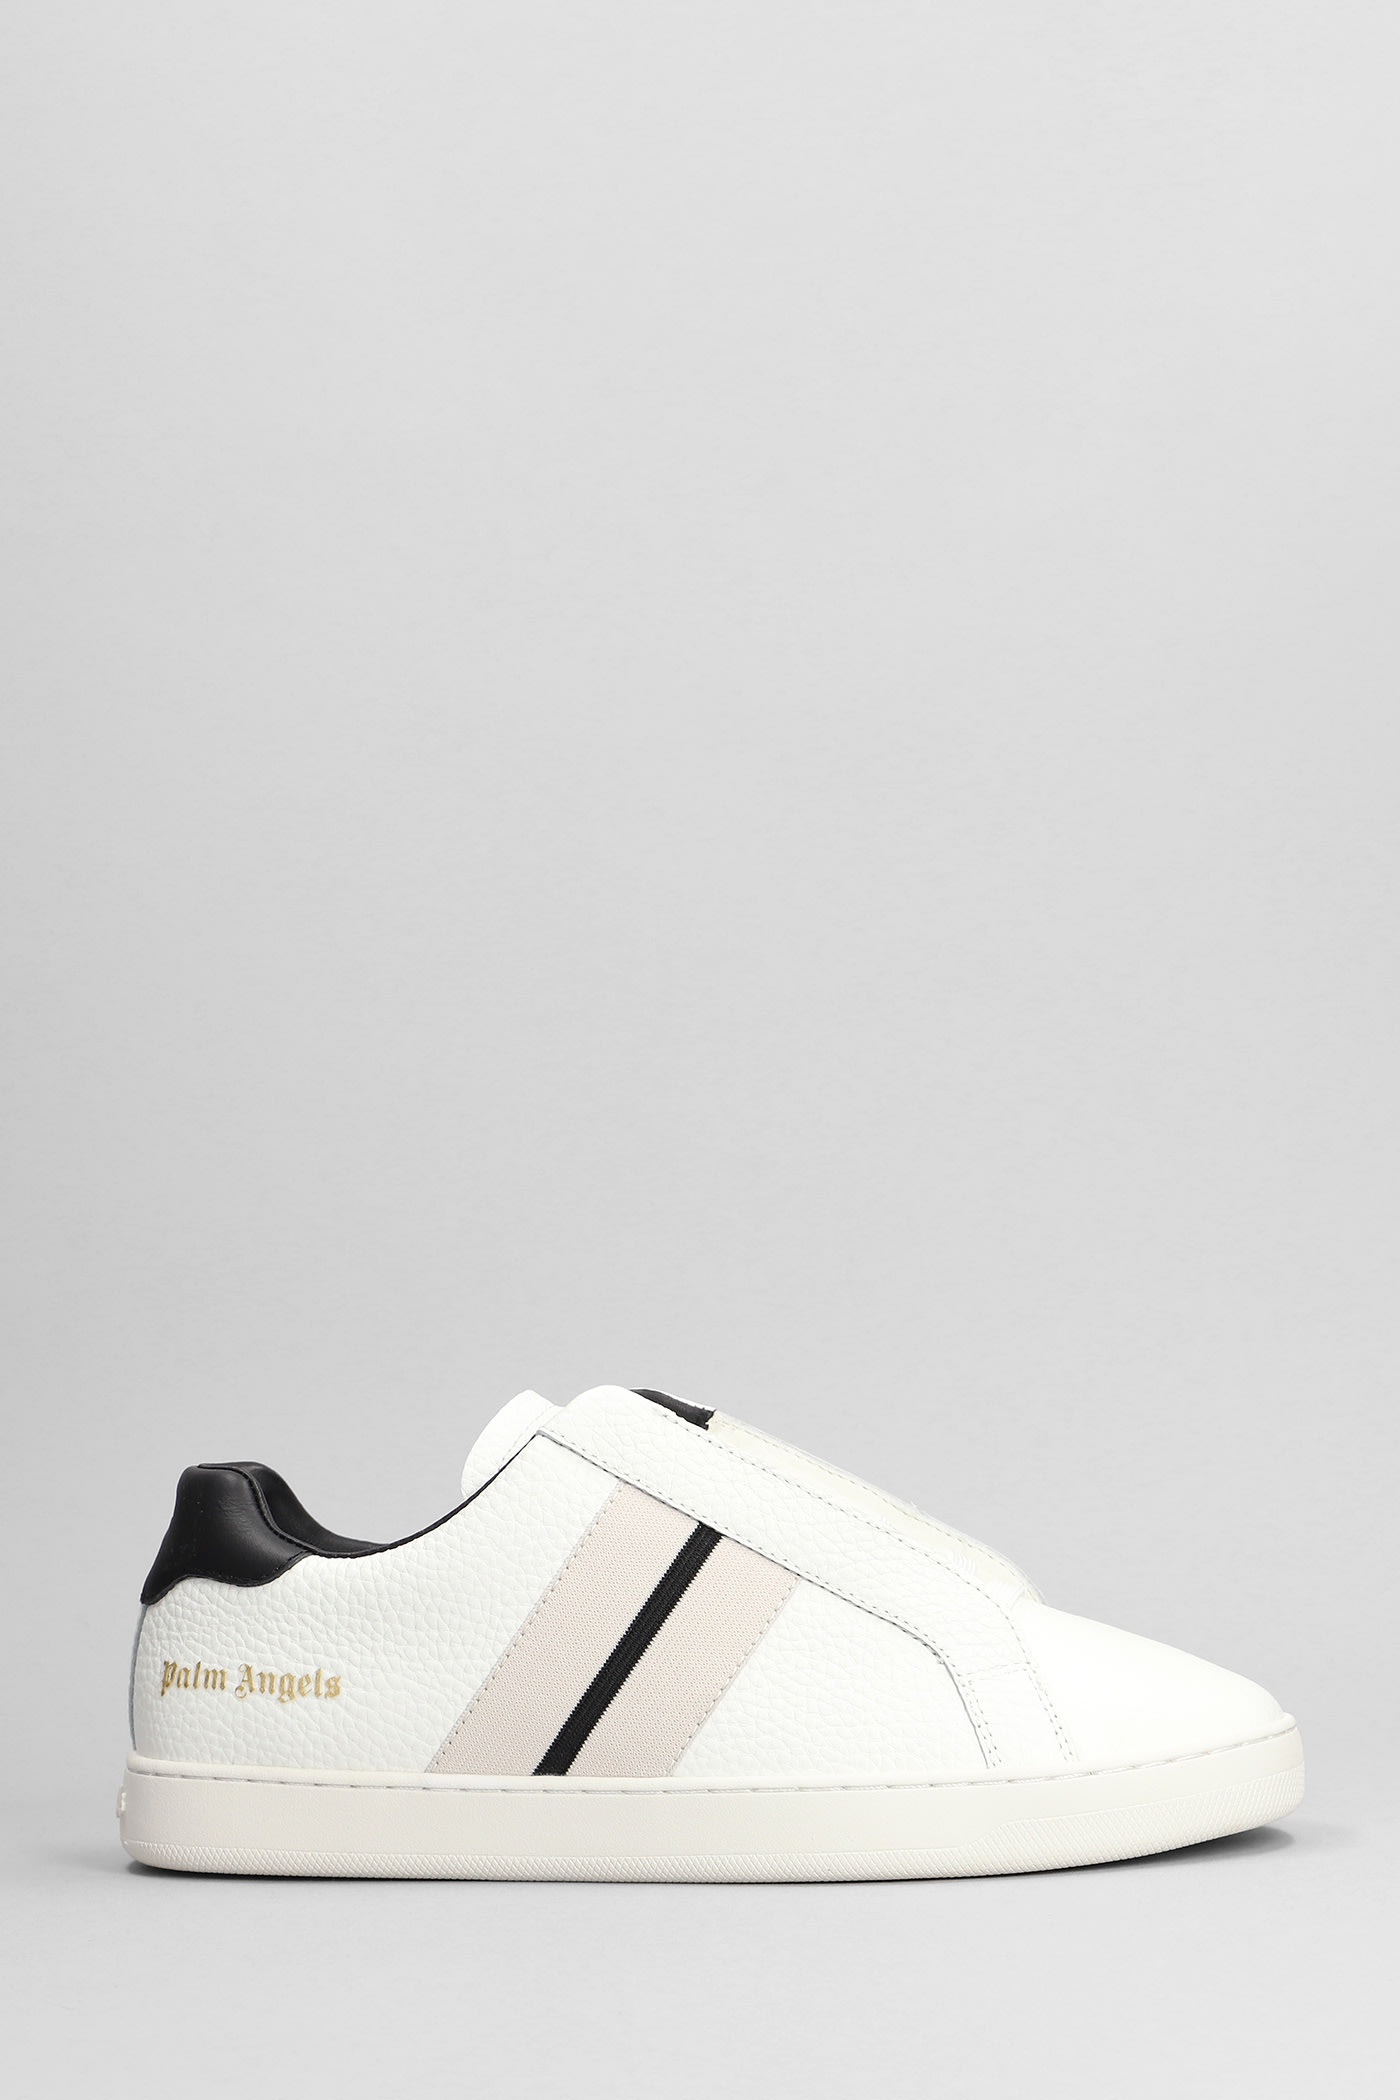 PALM ANGELS SNEAKERS IN WHITE LEATHER